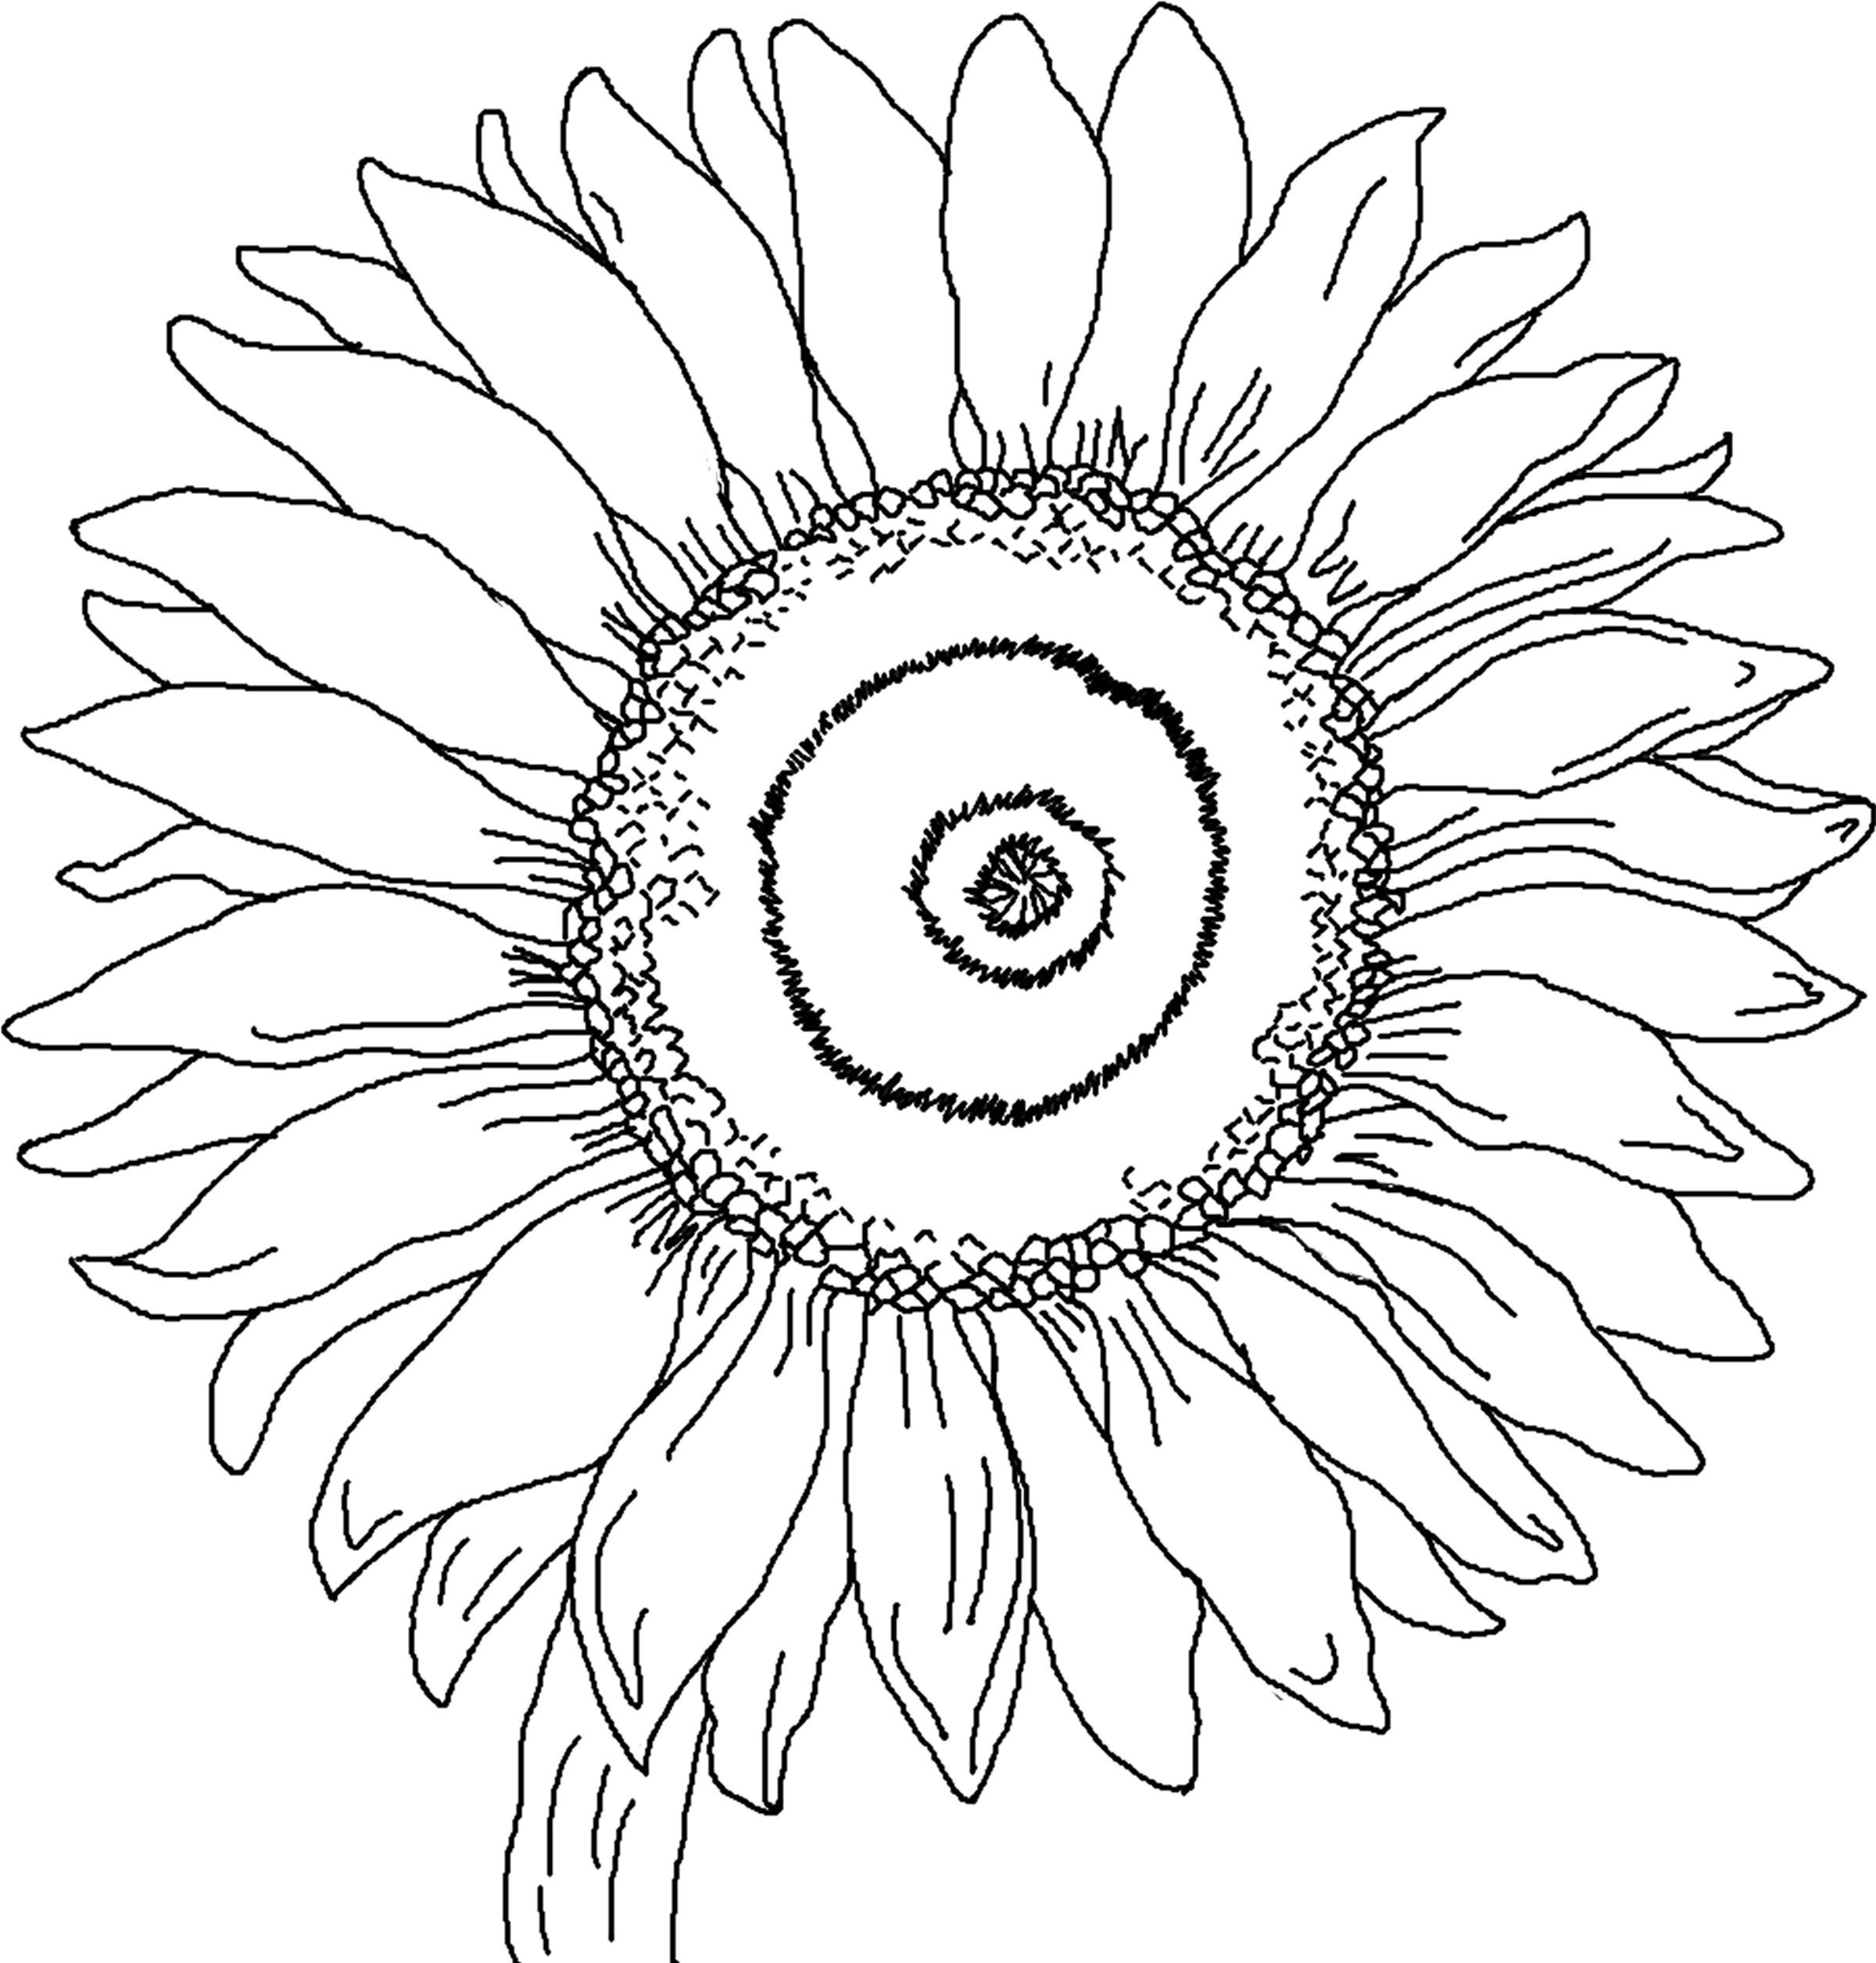 Sunflower Coloring Pages Printable
 Free Printable Sunflower Coloring Pages For Kids